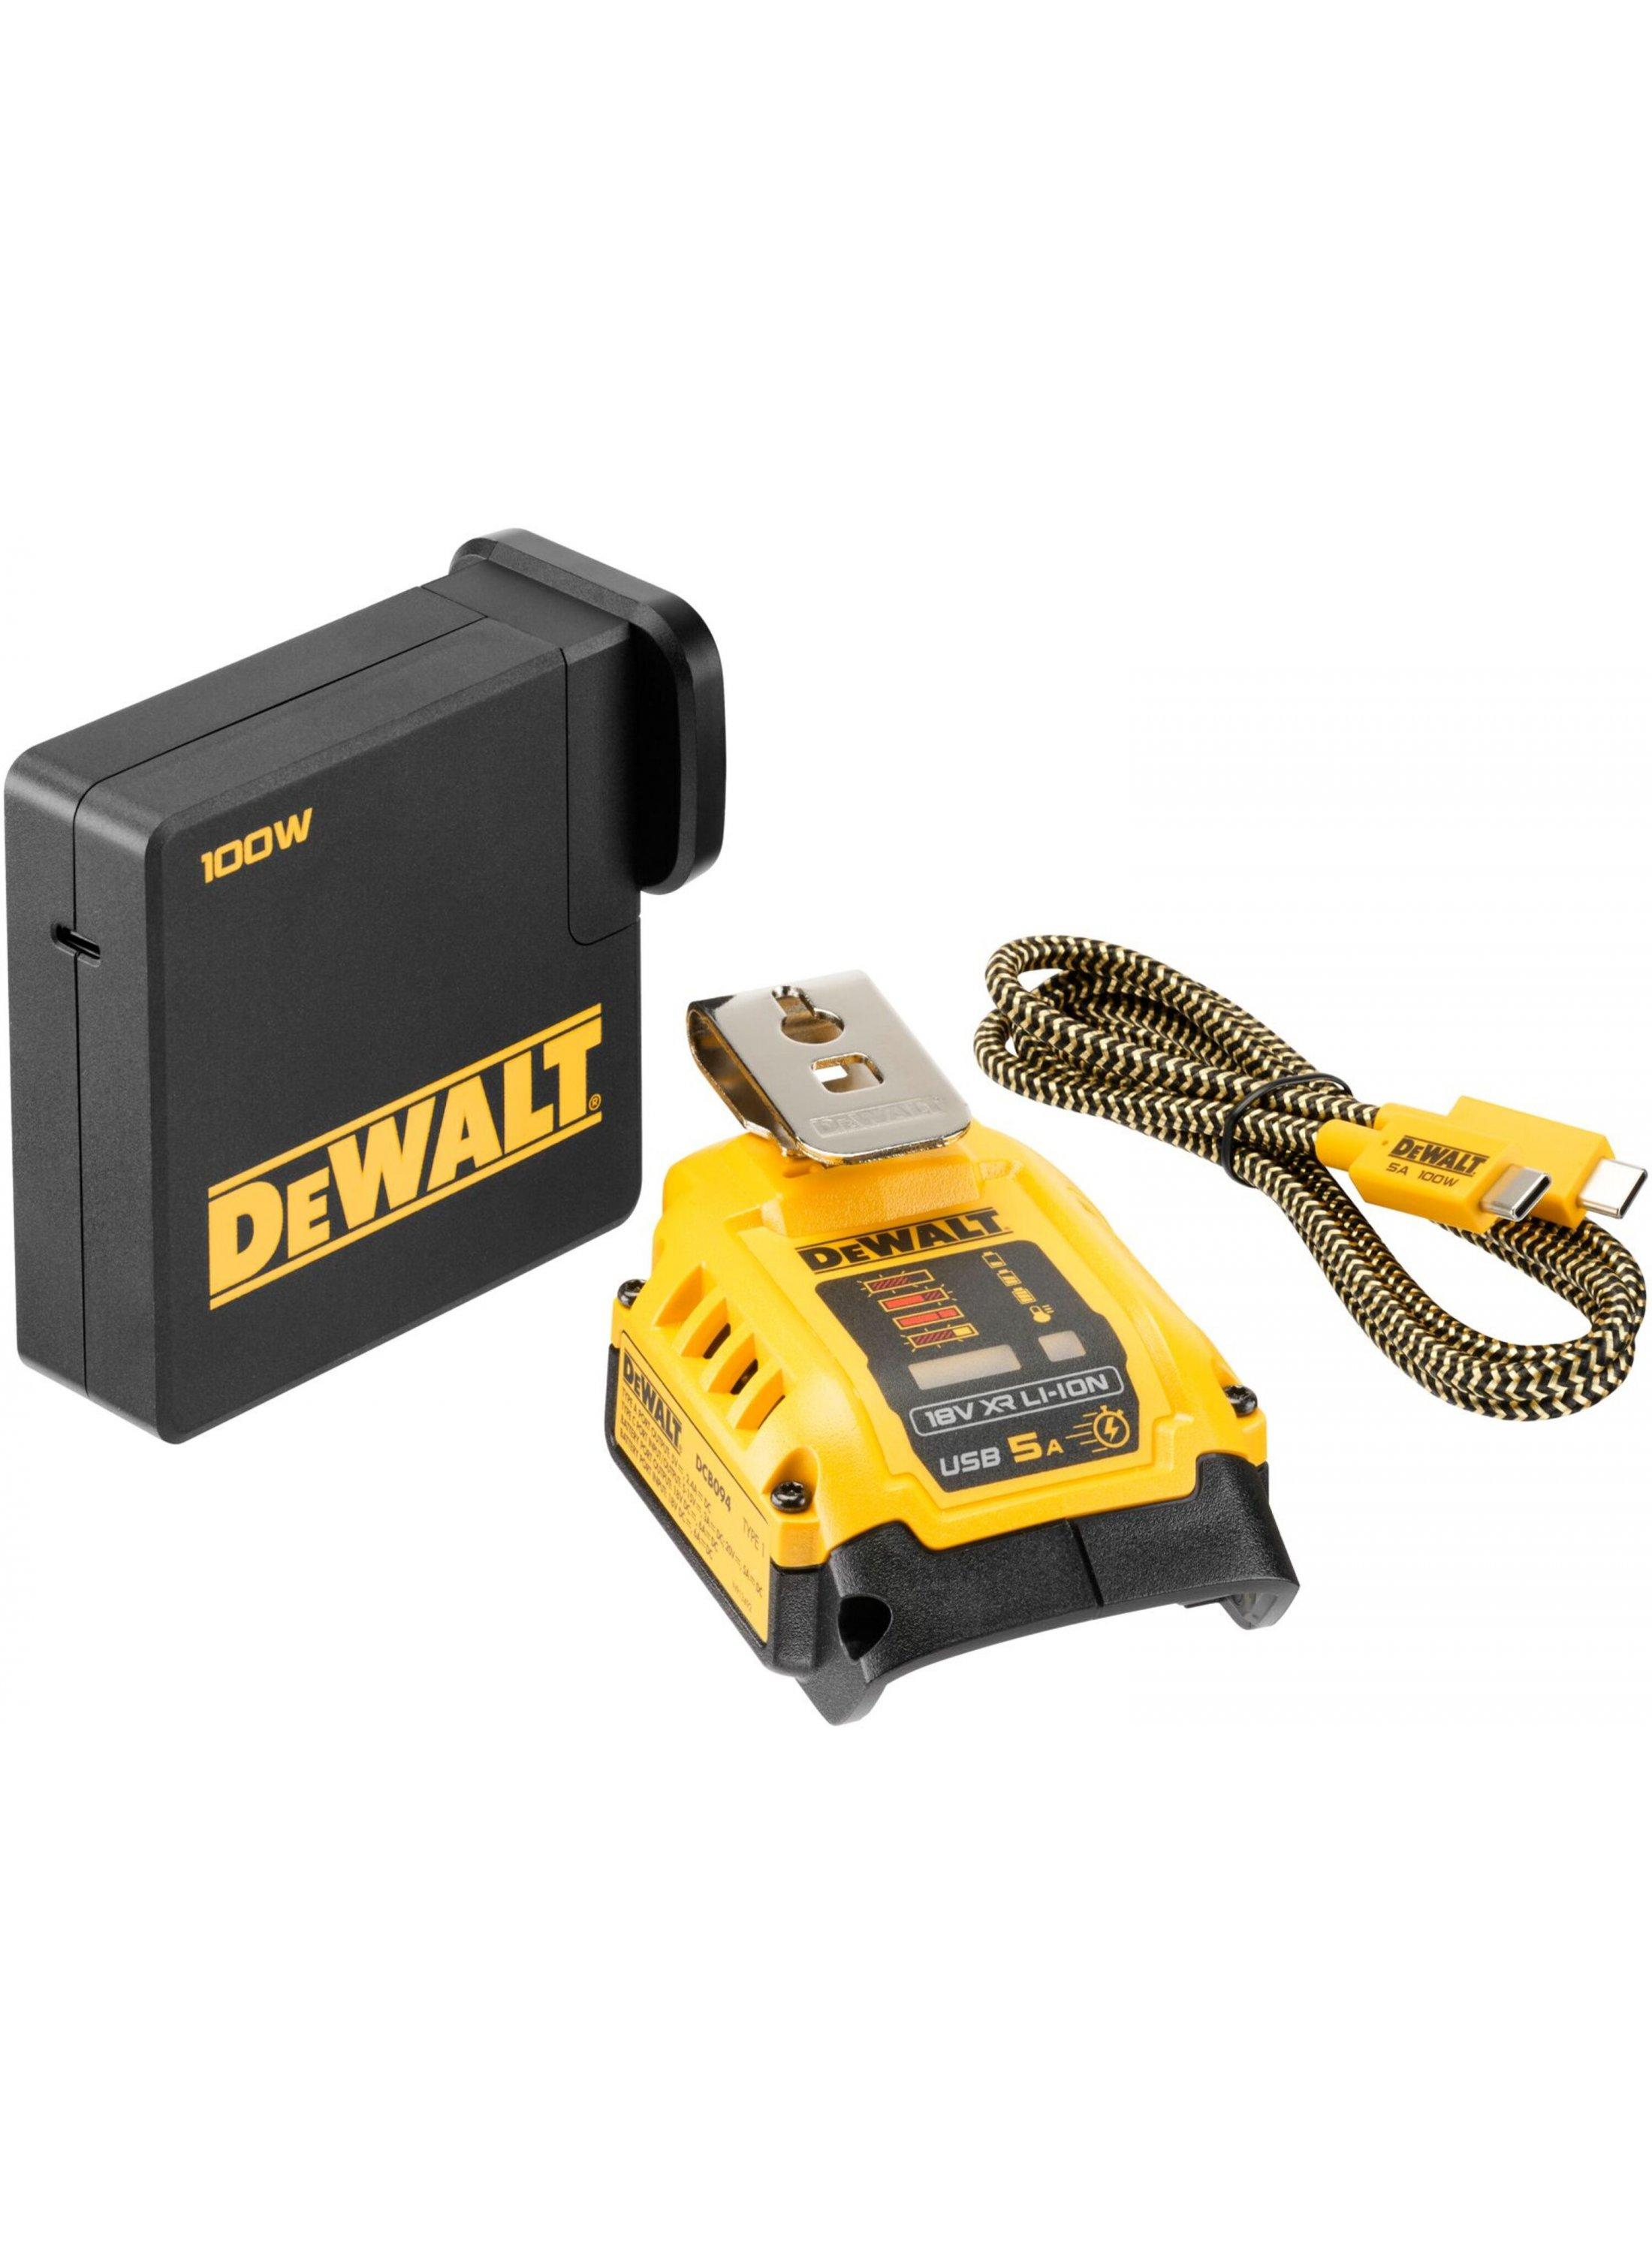 battery adapter snap on to dewalt